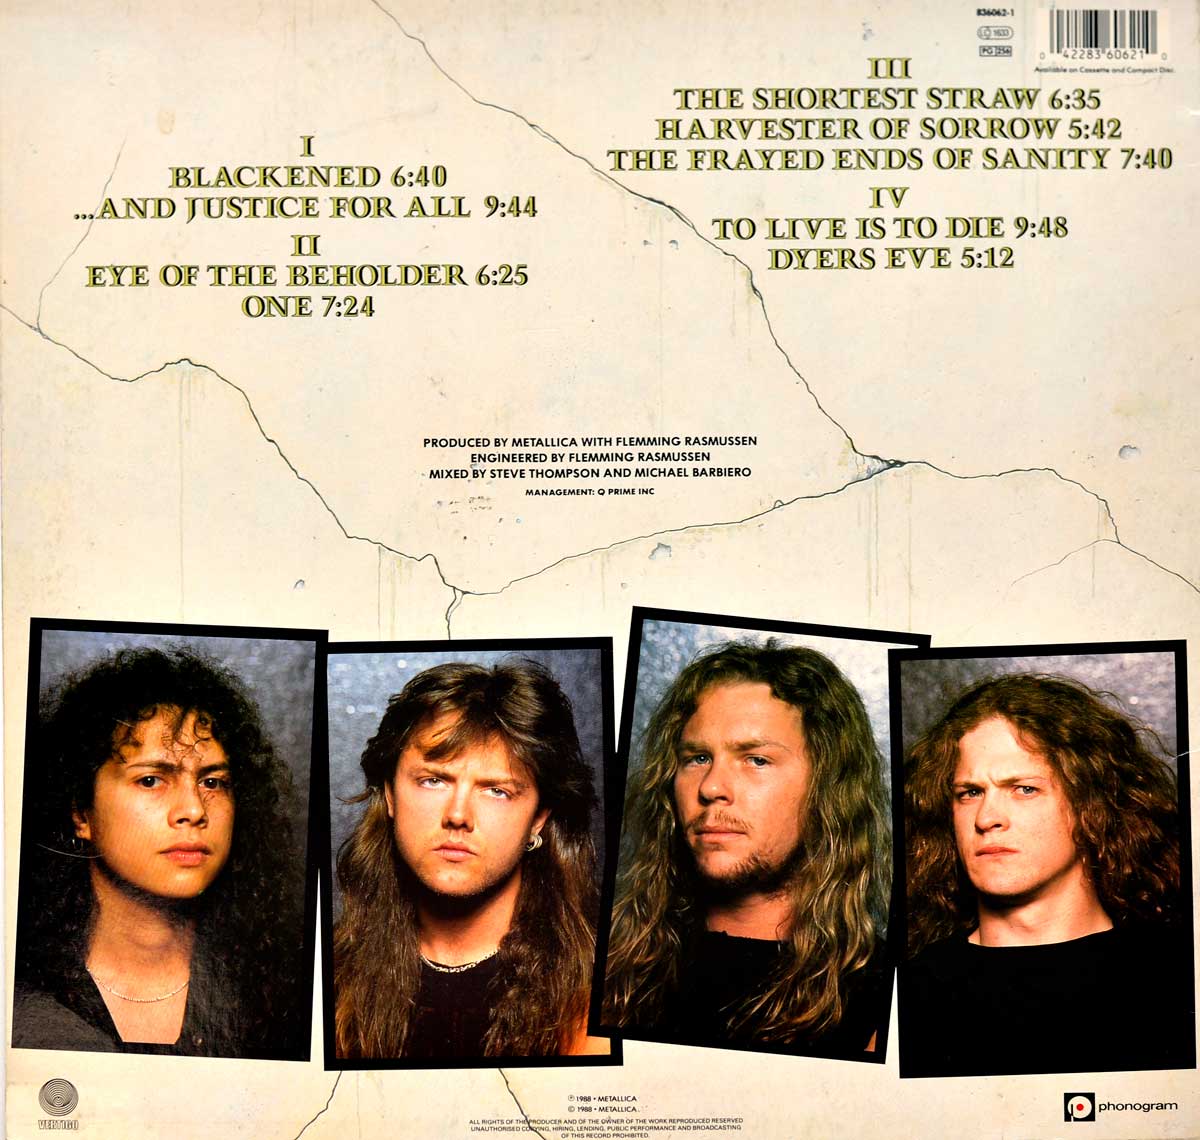 Album Back Cover  Photo of "METALLICA And Justice For All"